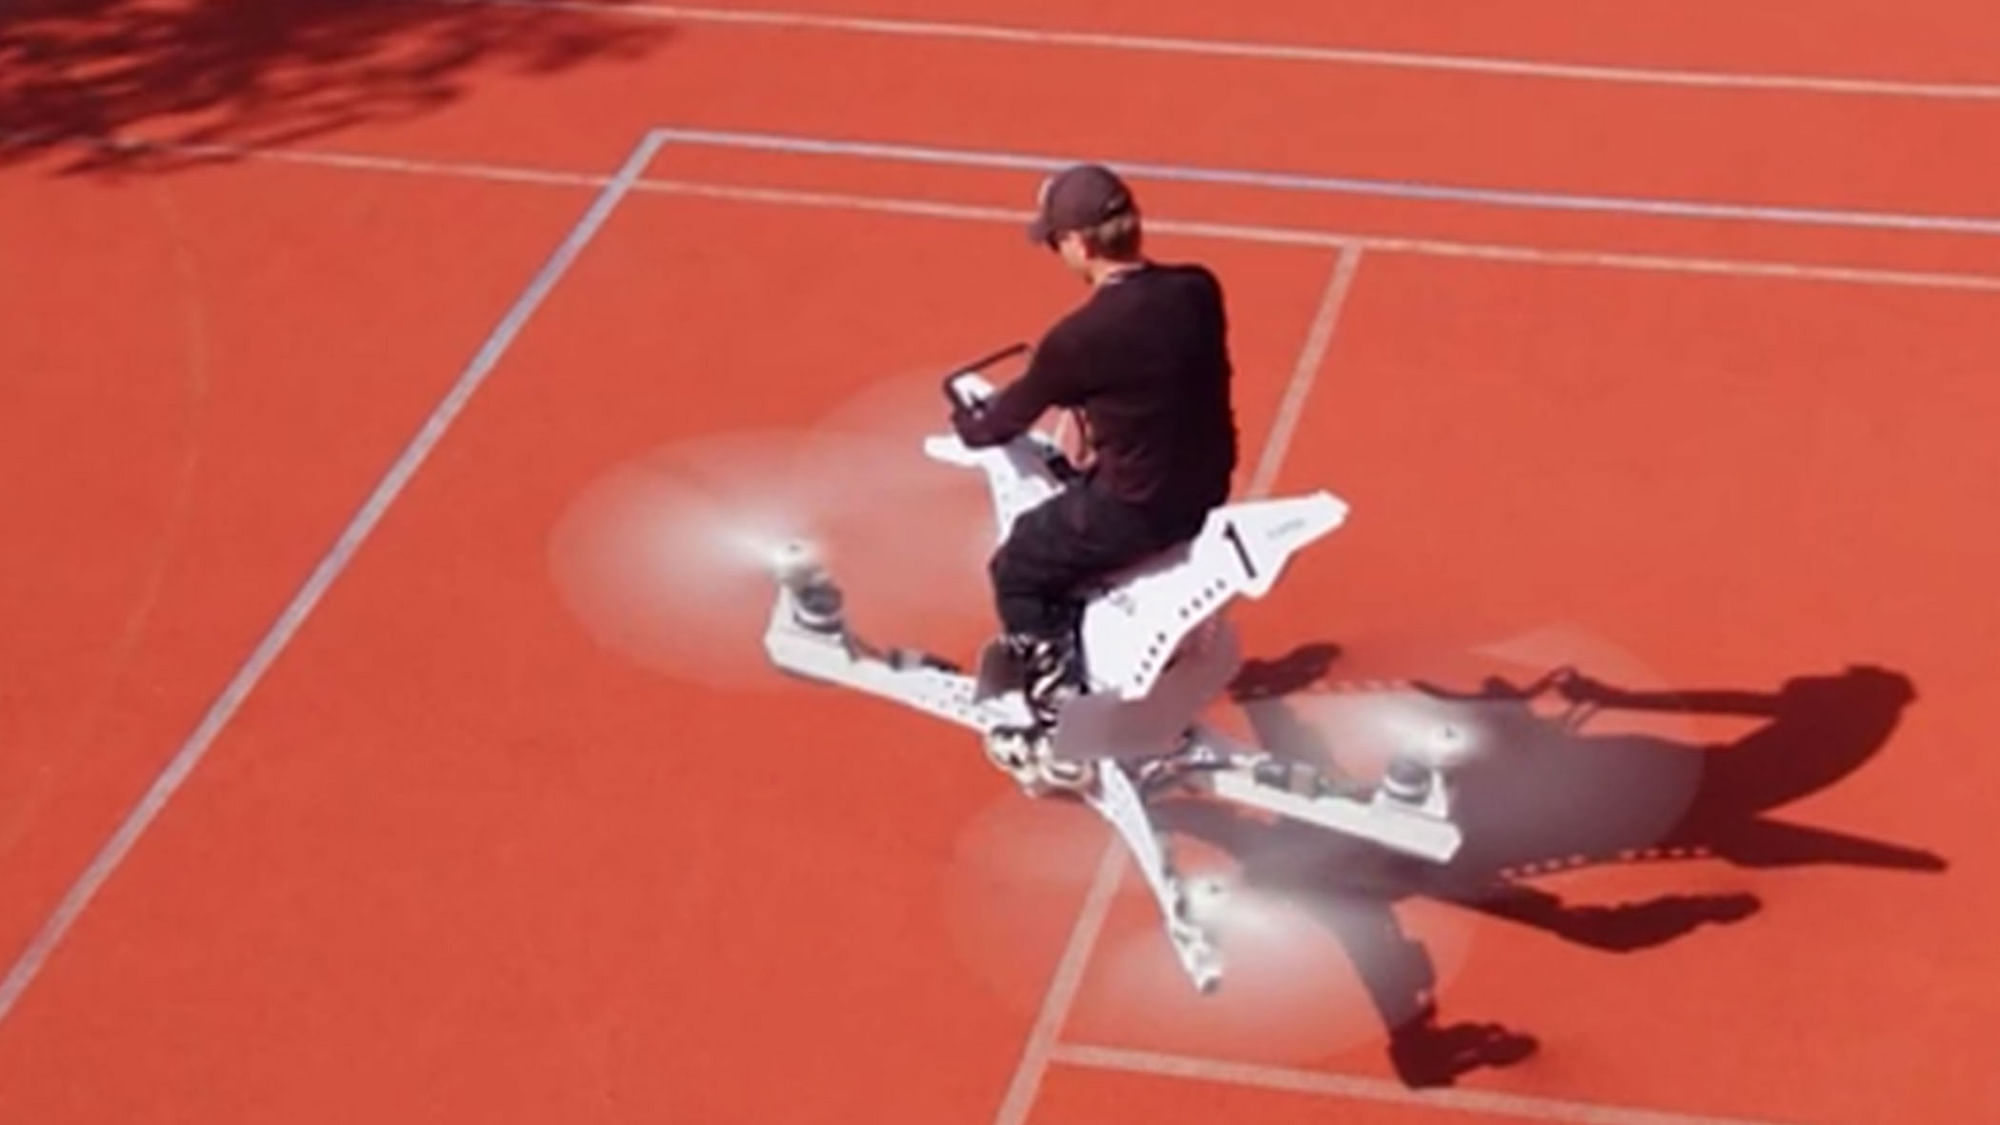 Hoversurf’s Scorpion 3, the world’s first commercial manned quadcopter. (Photo Courtesy: Hoversurf.com)